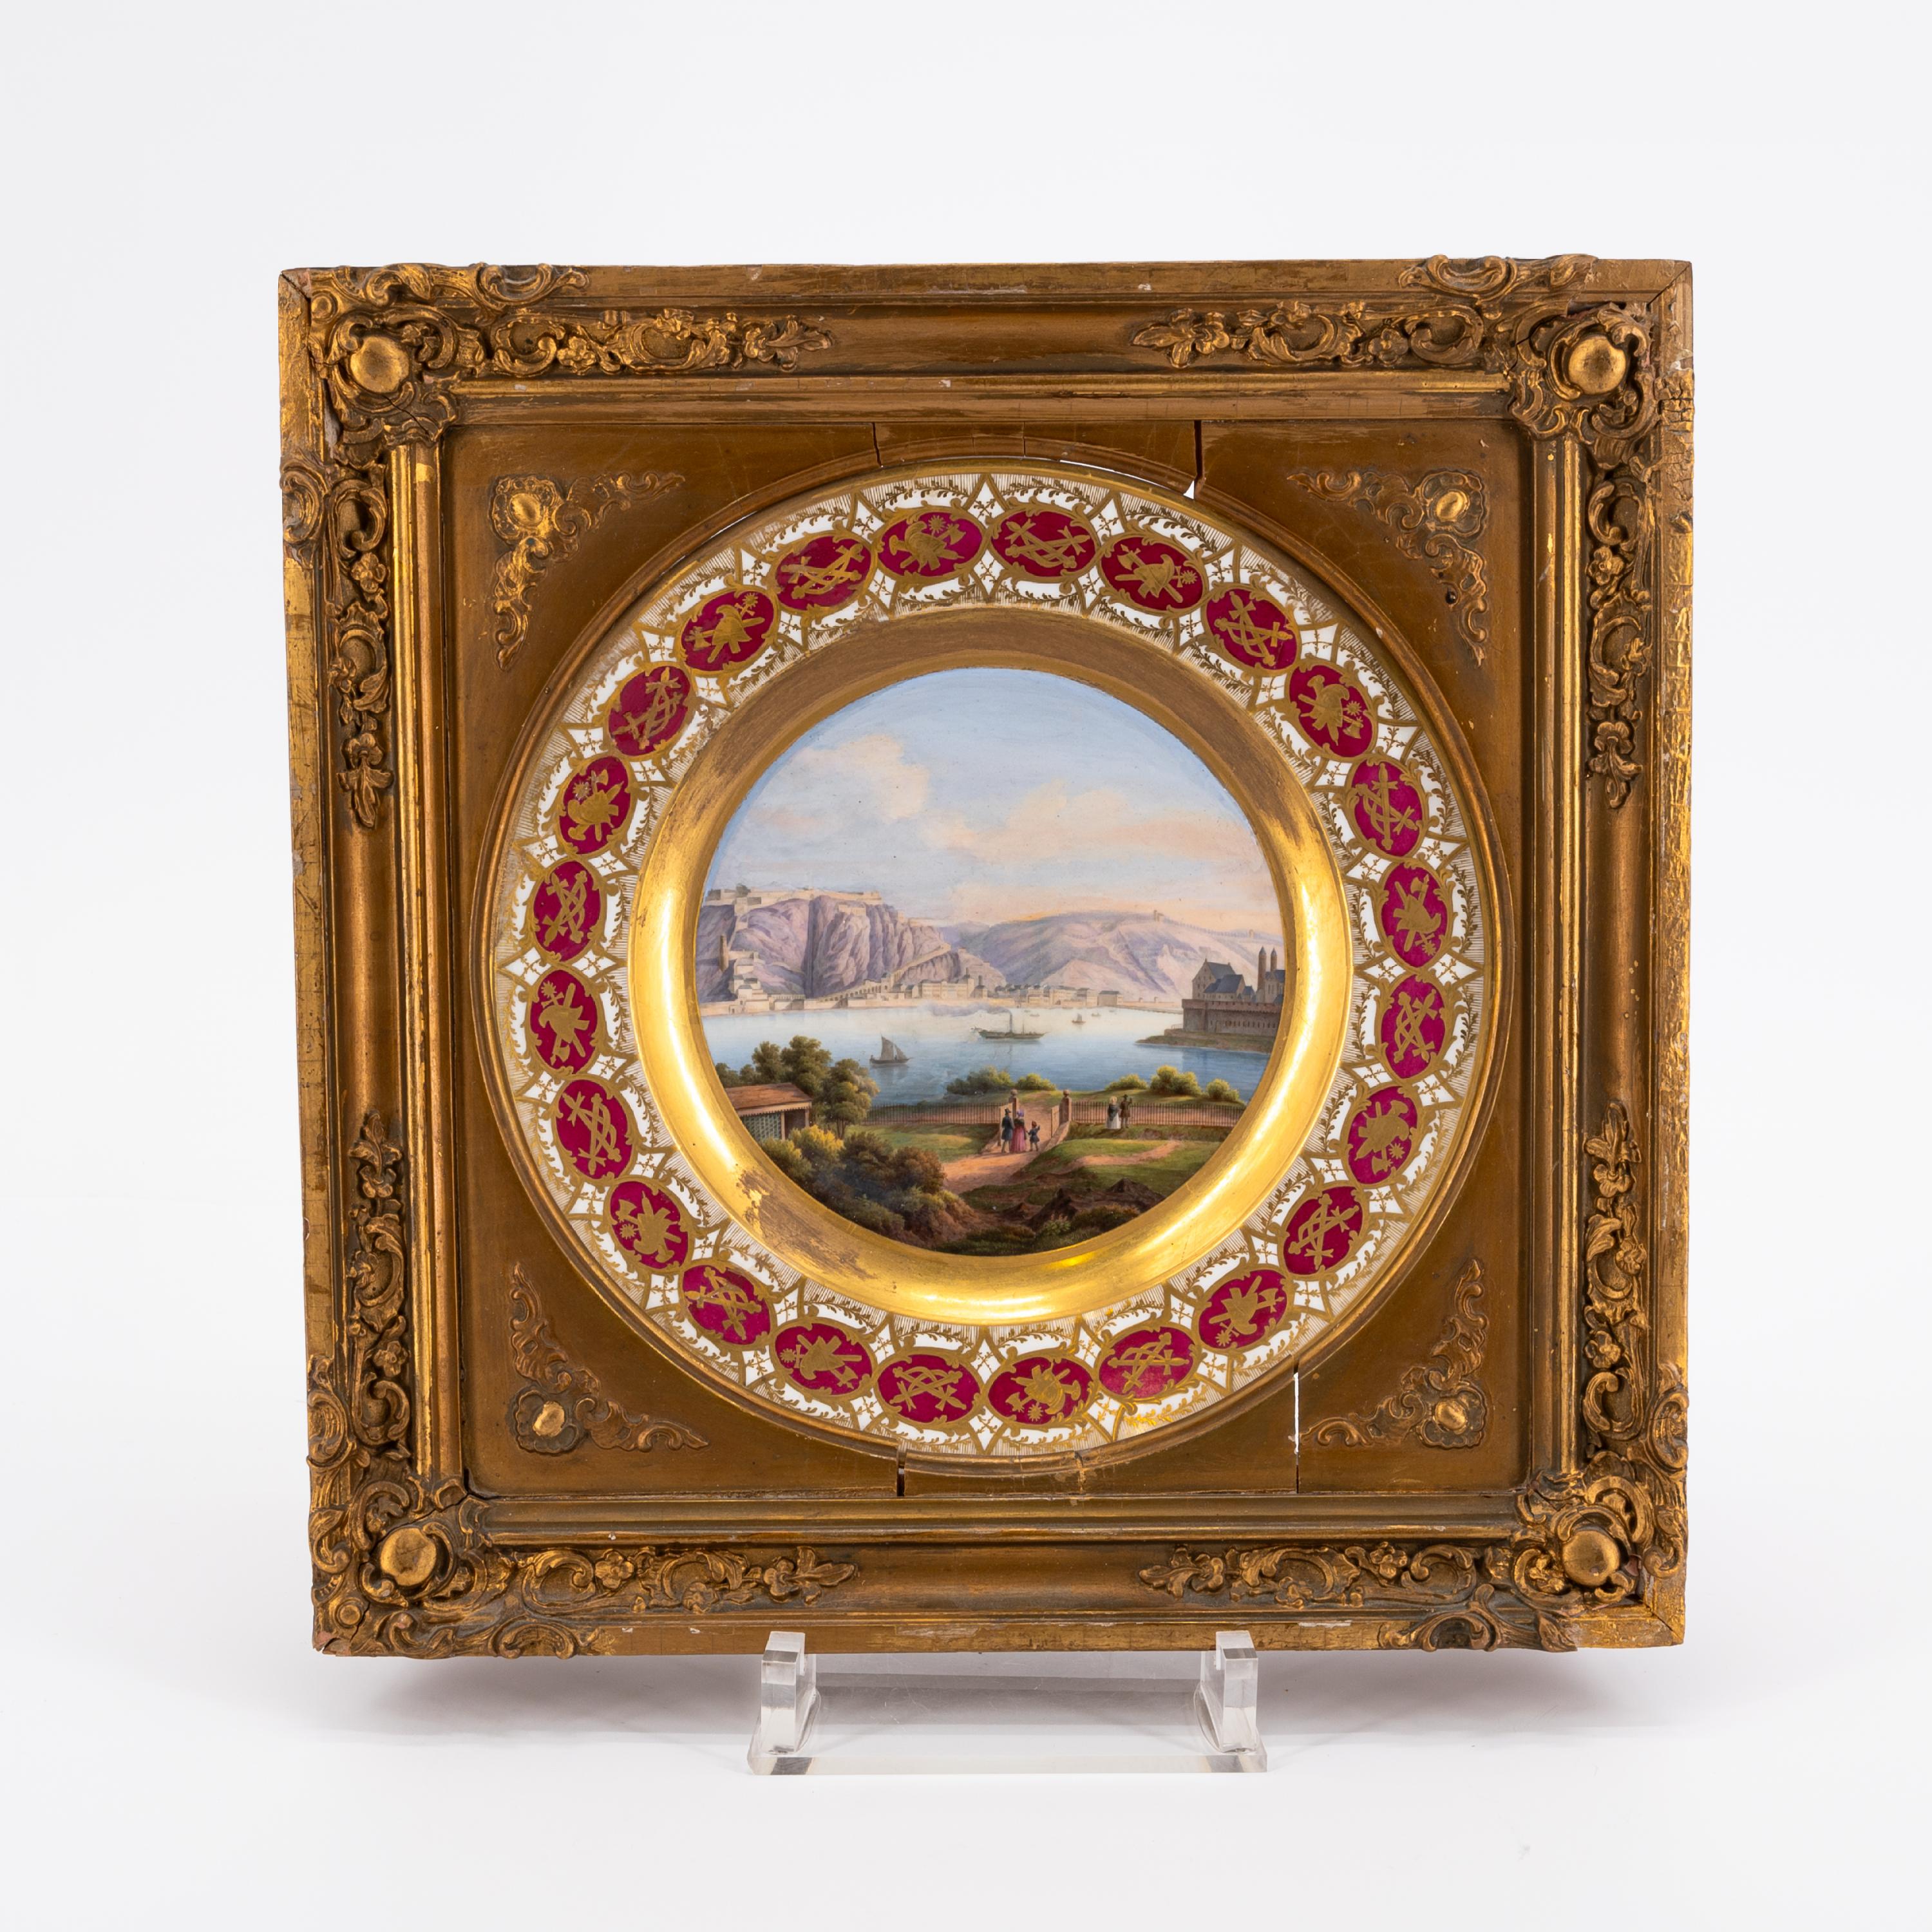 EXEPTIONAL SERIES OF TWELVE PORCELAIN PLATES WITH ROMANTIC VIEWS OF THE RHINE - Image 11 of 26